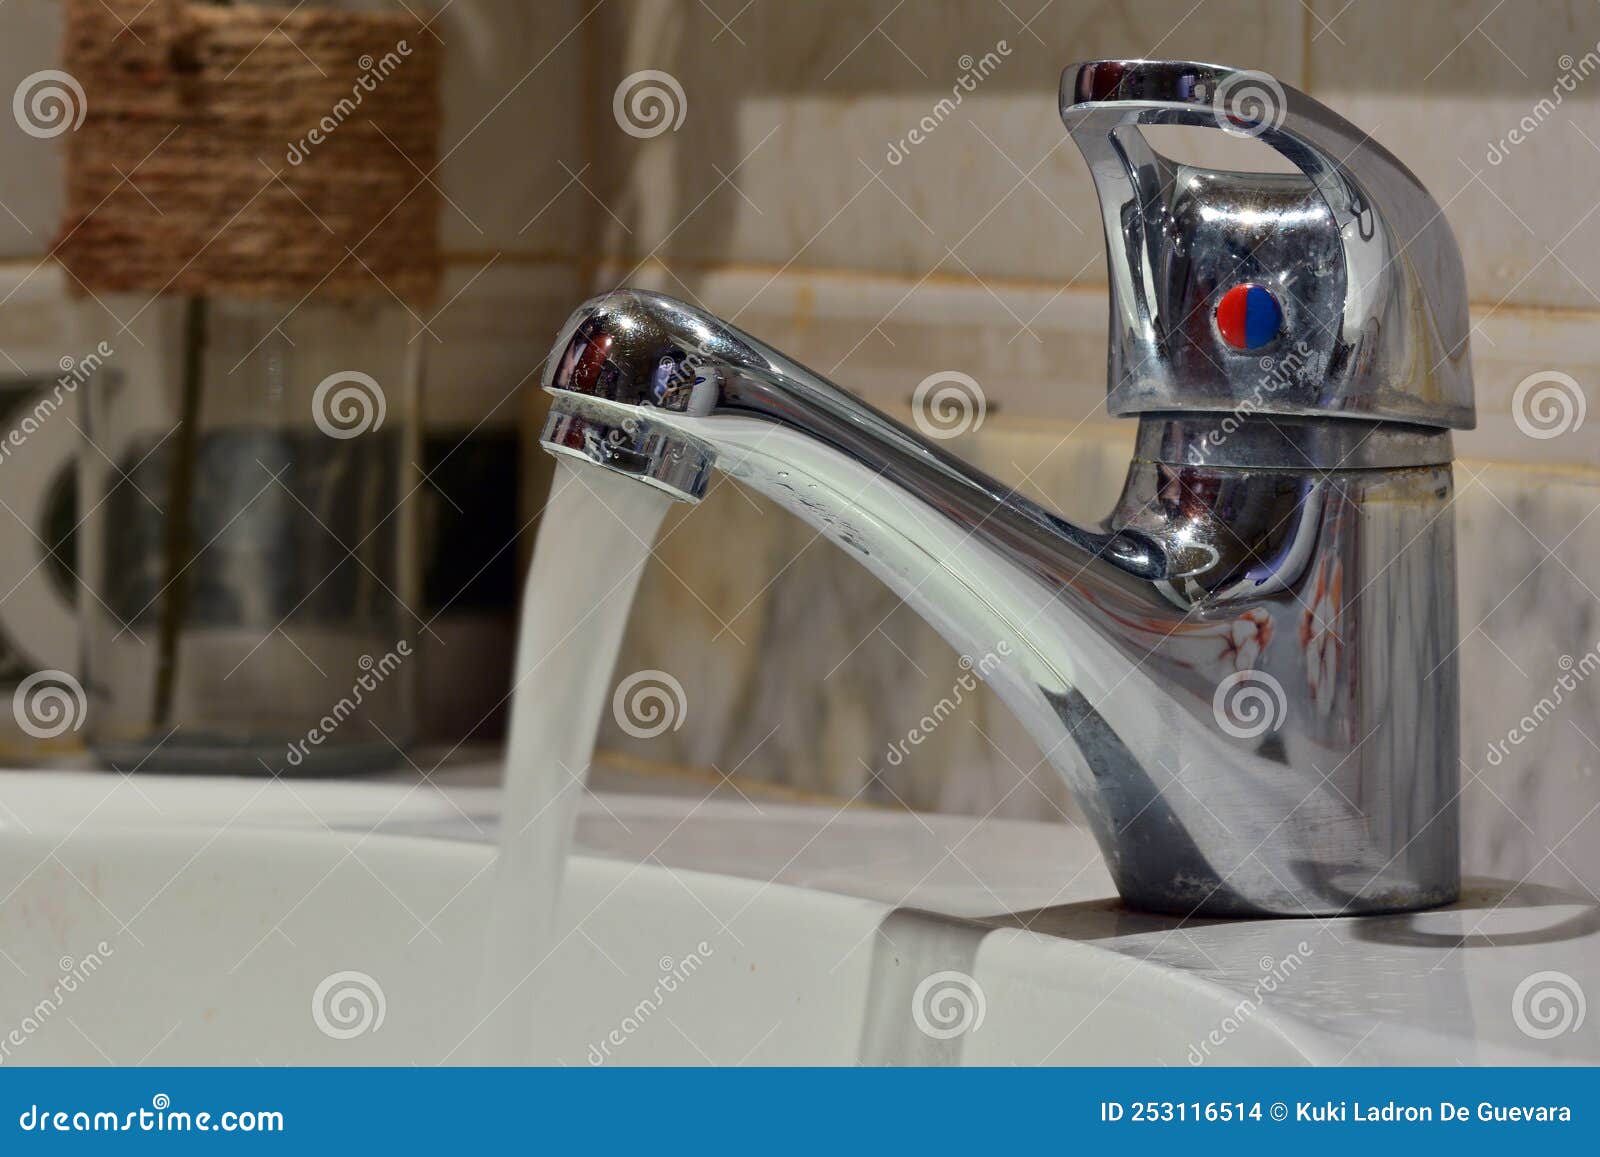 stream of water falling from a faucet in a sink